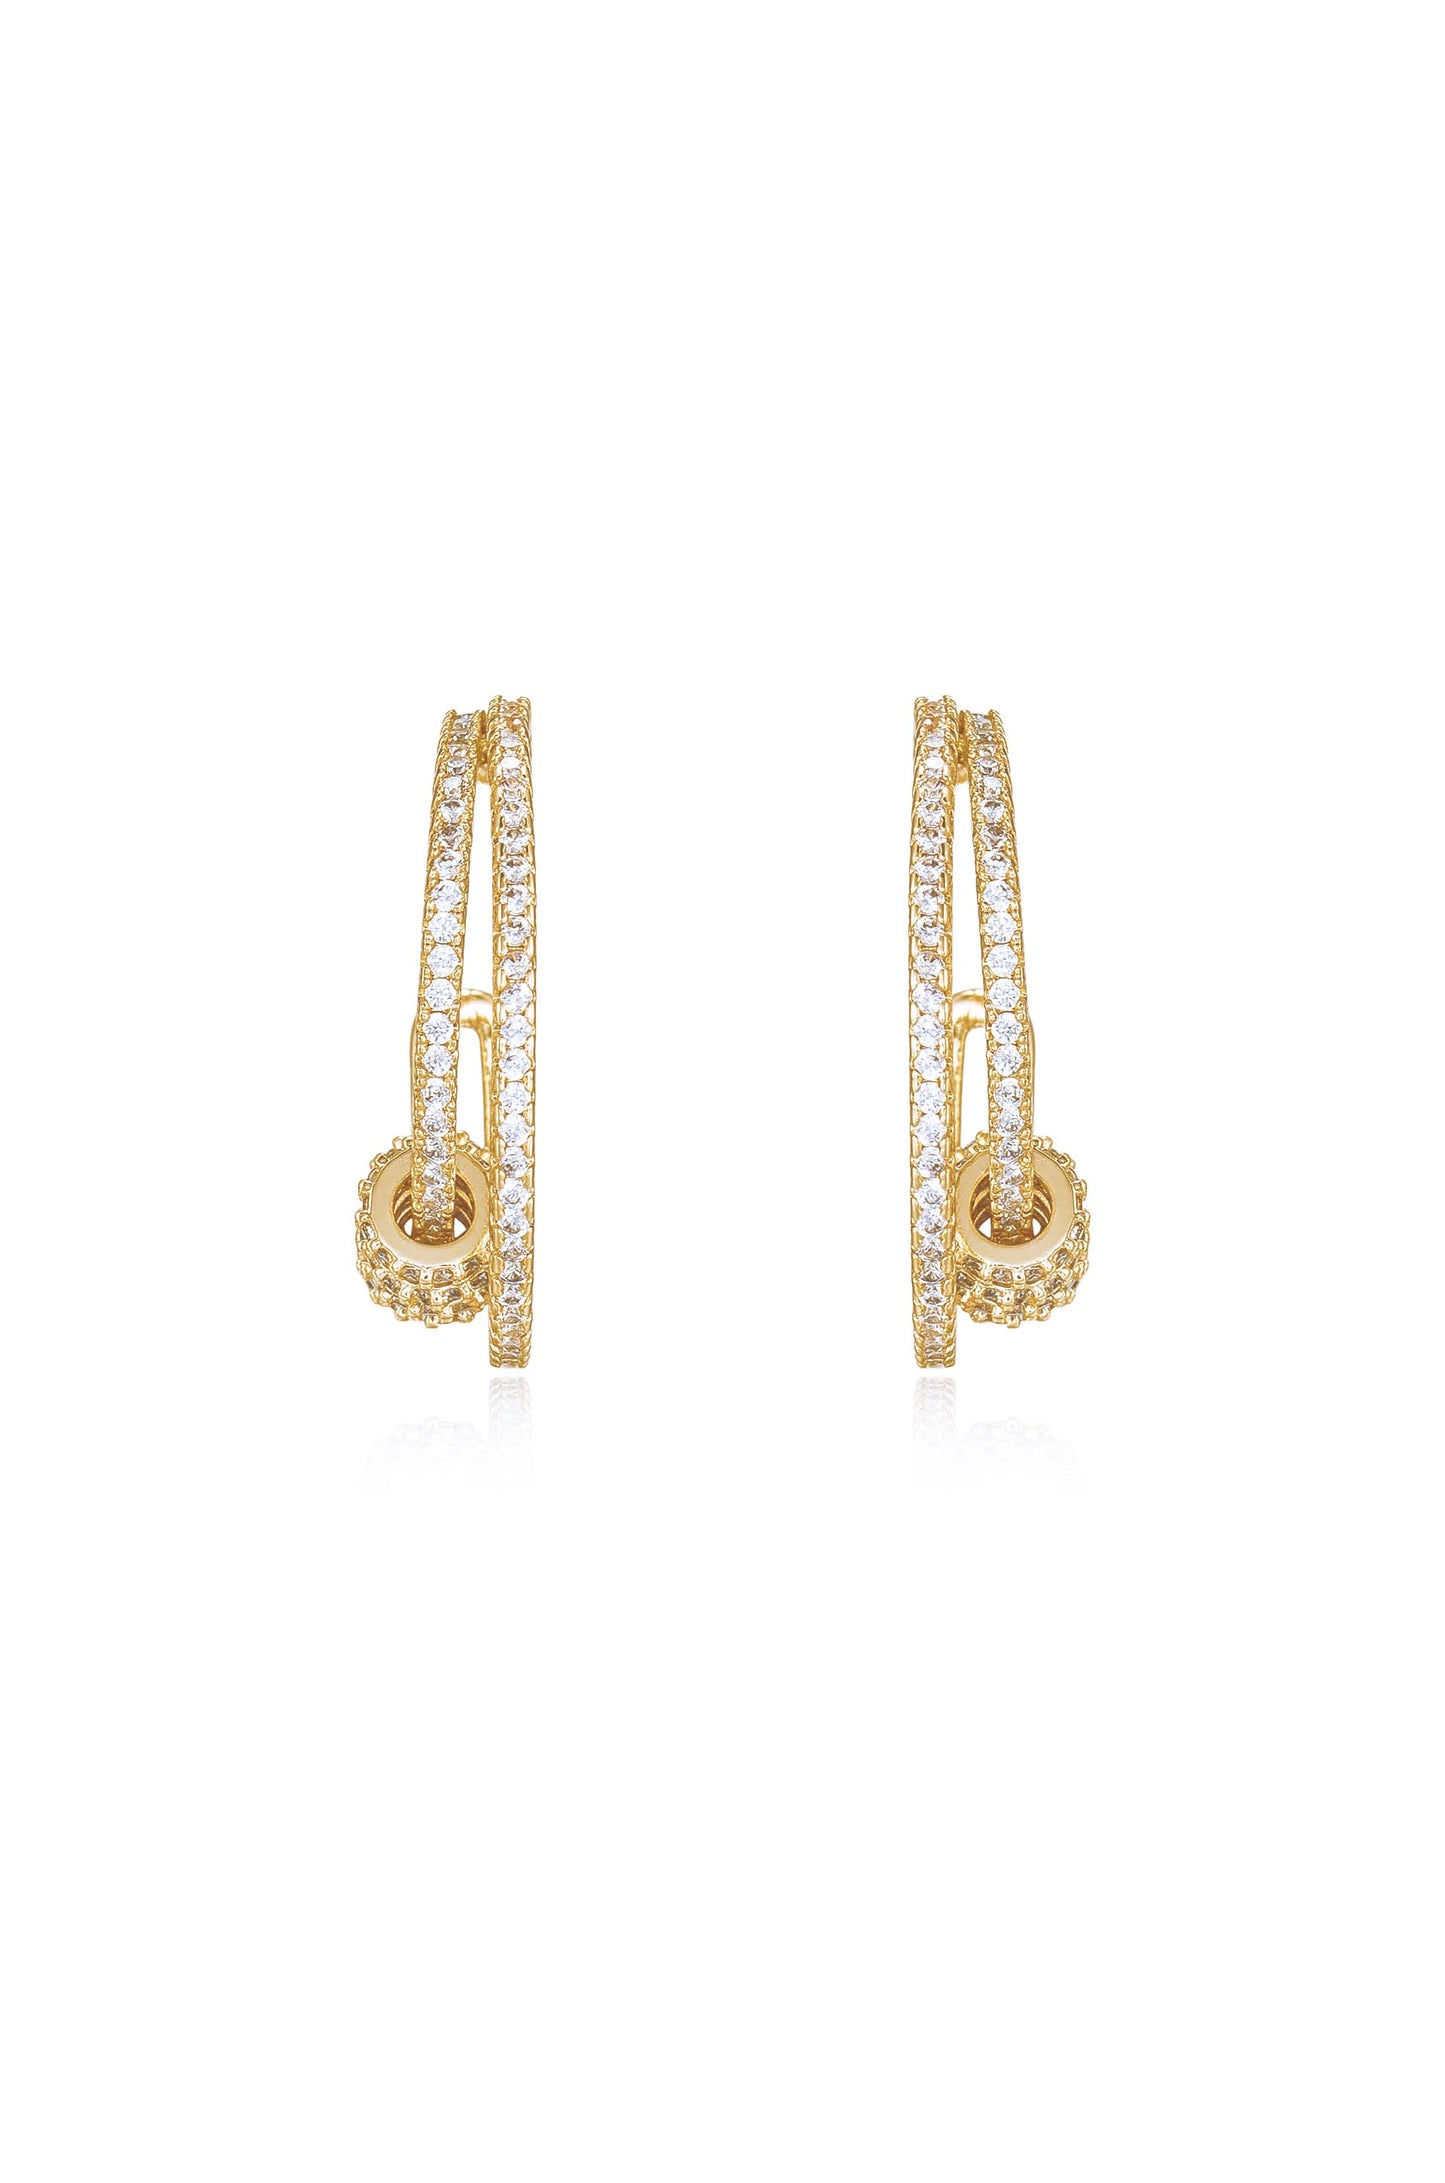 Double Crystal Pave Ring 18k Gold Plated Hoop Earrings front